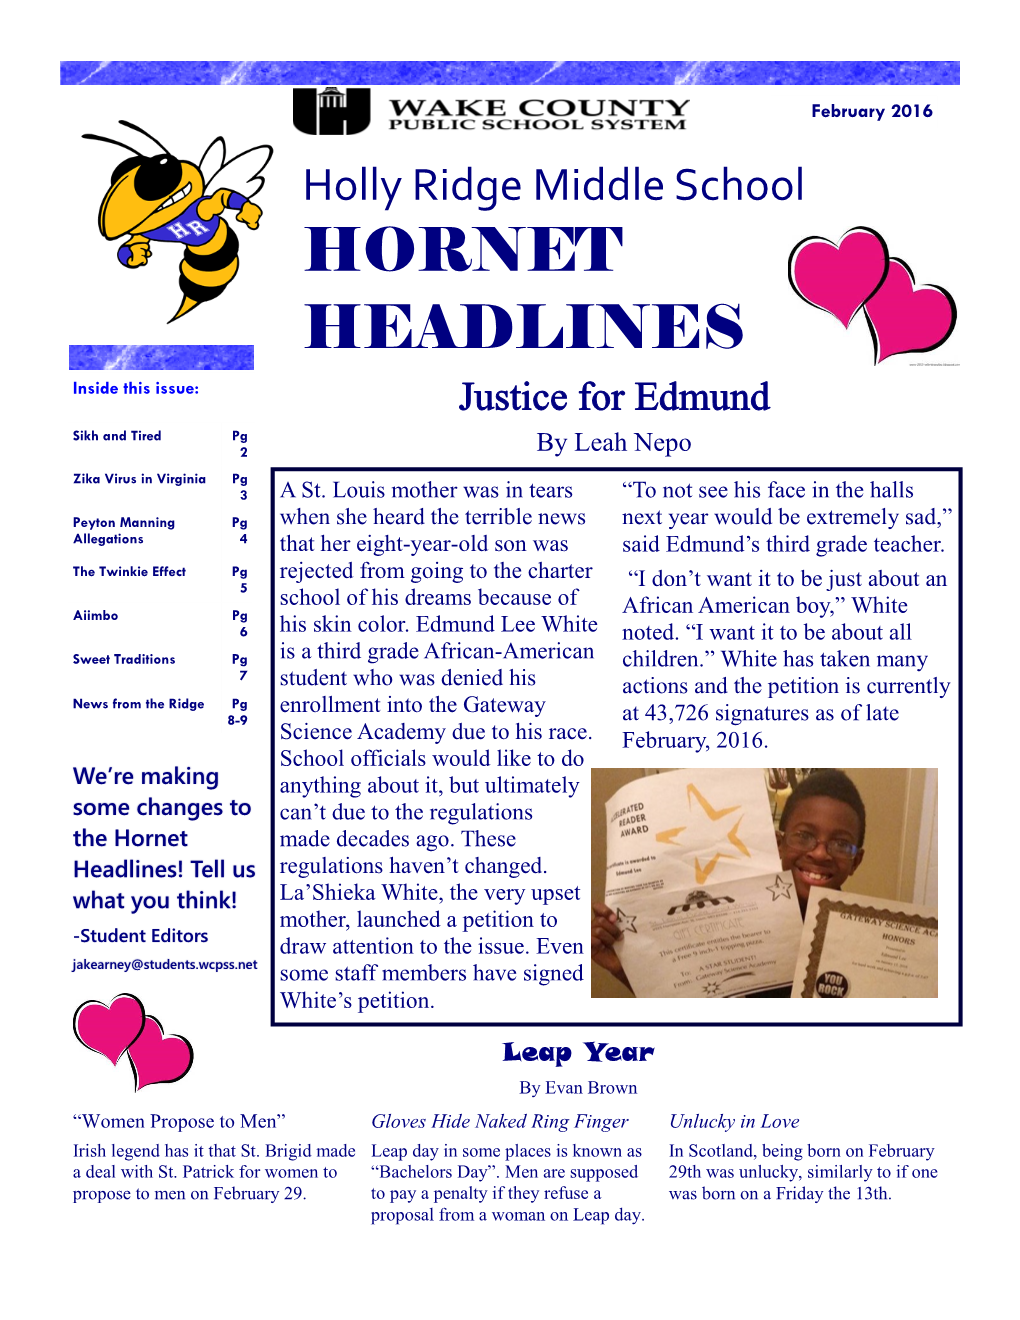 HORNET HEADLINES Inside This Issue: Justice for Edmund Sikh and Tired Pg 2 by Leah Nepo Zika Virus in Virginia Pg 3 a St